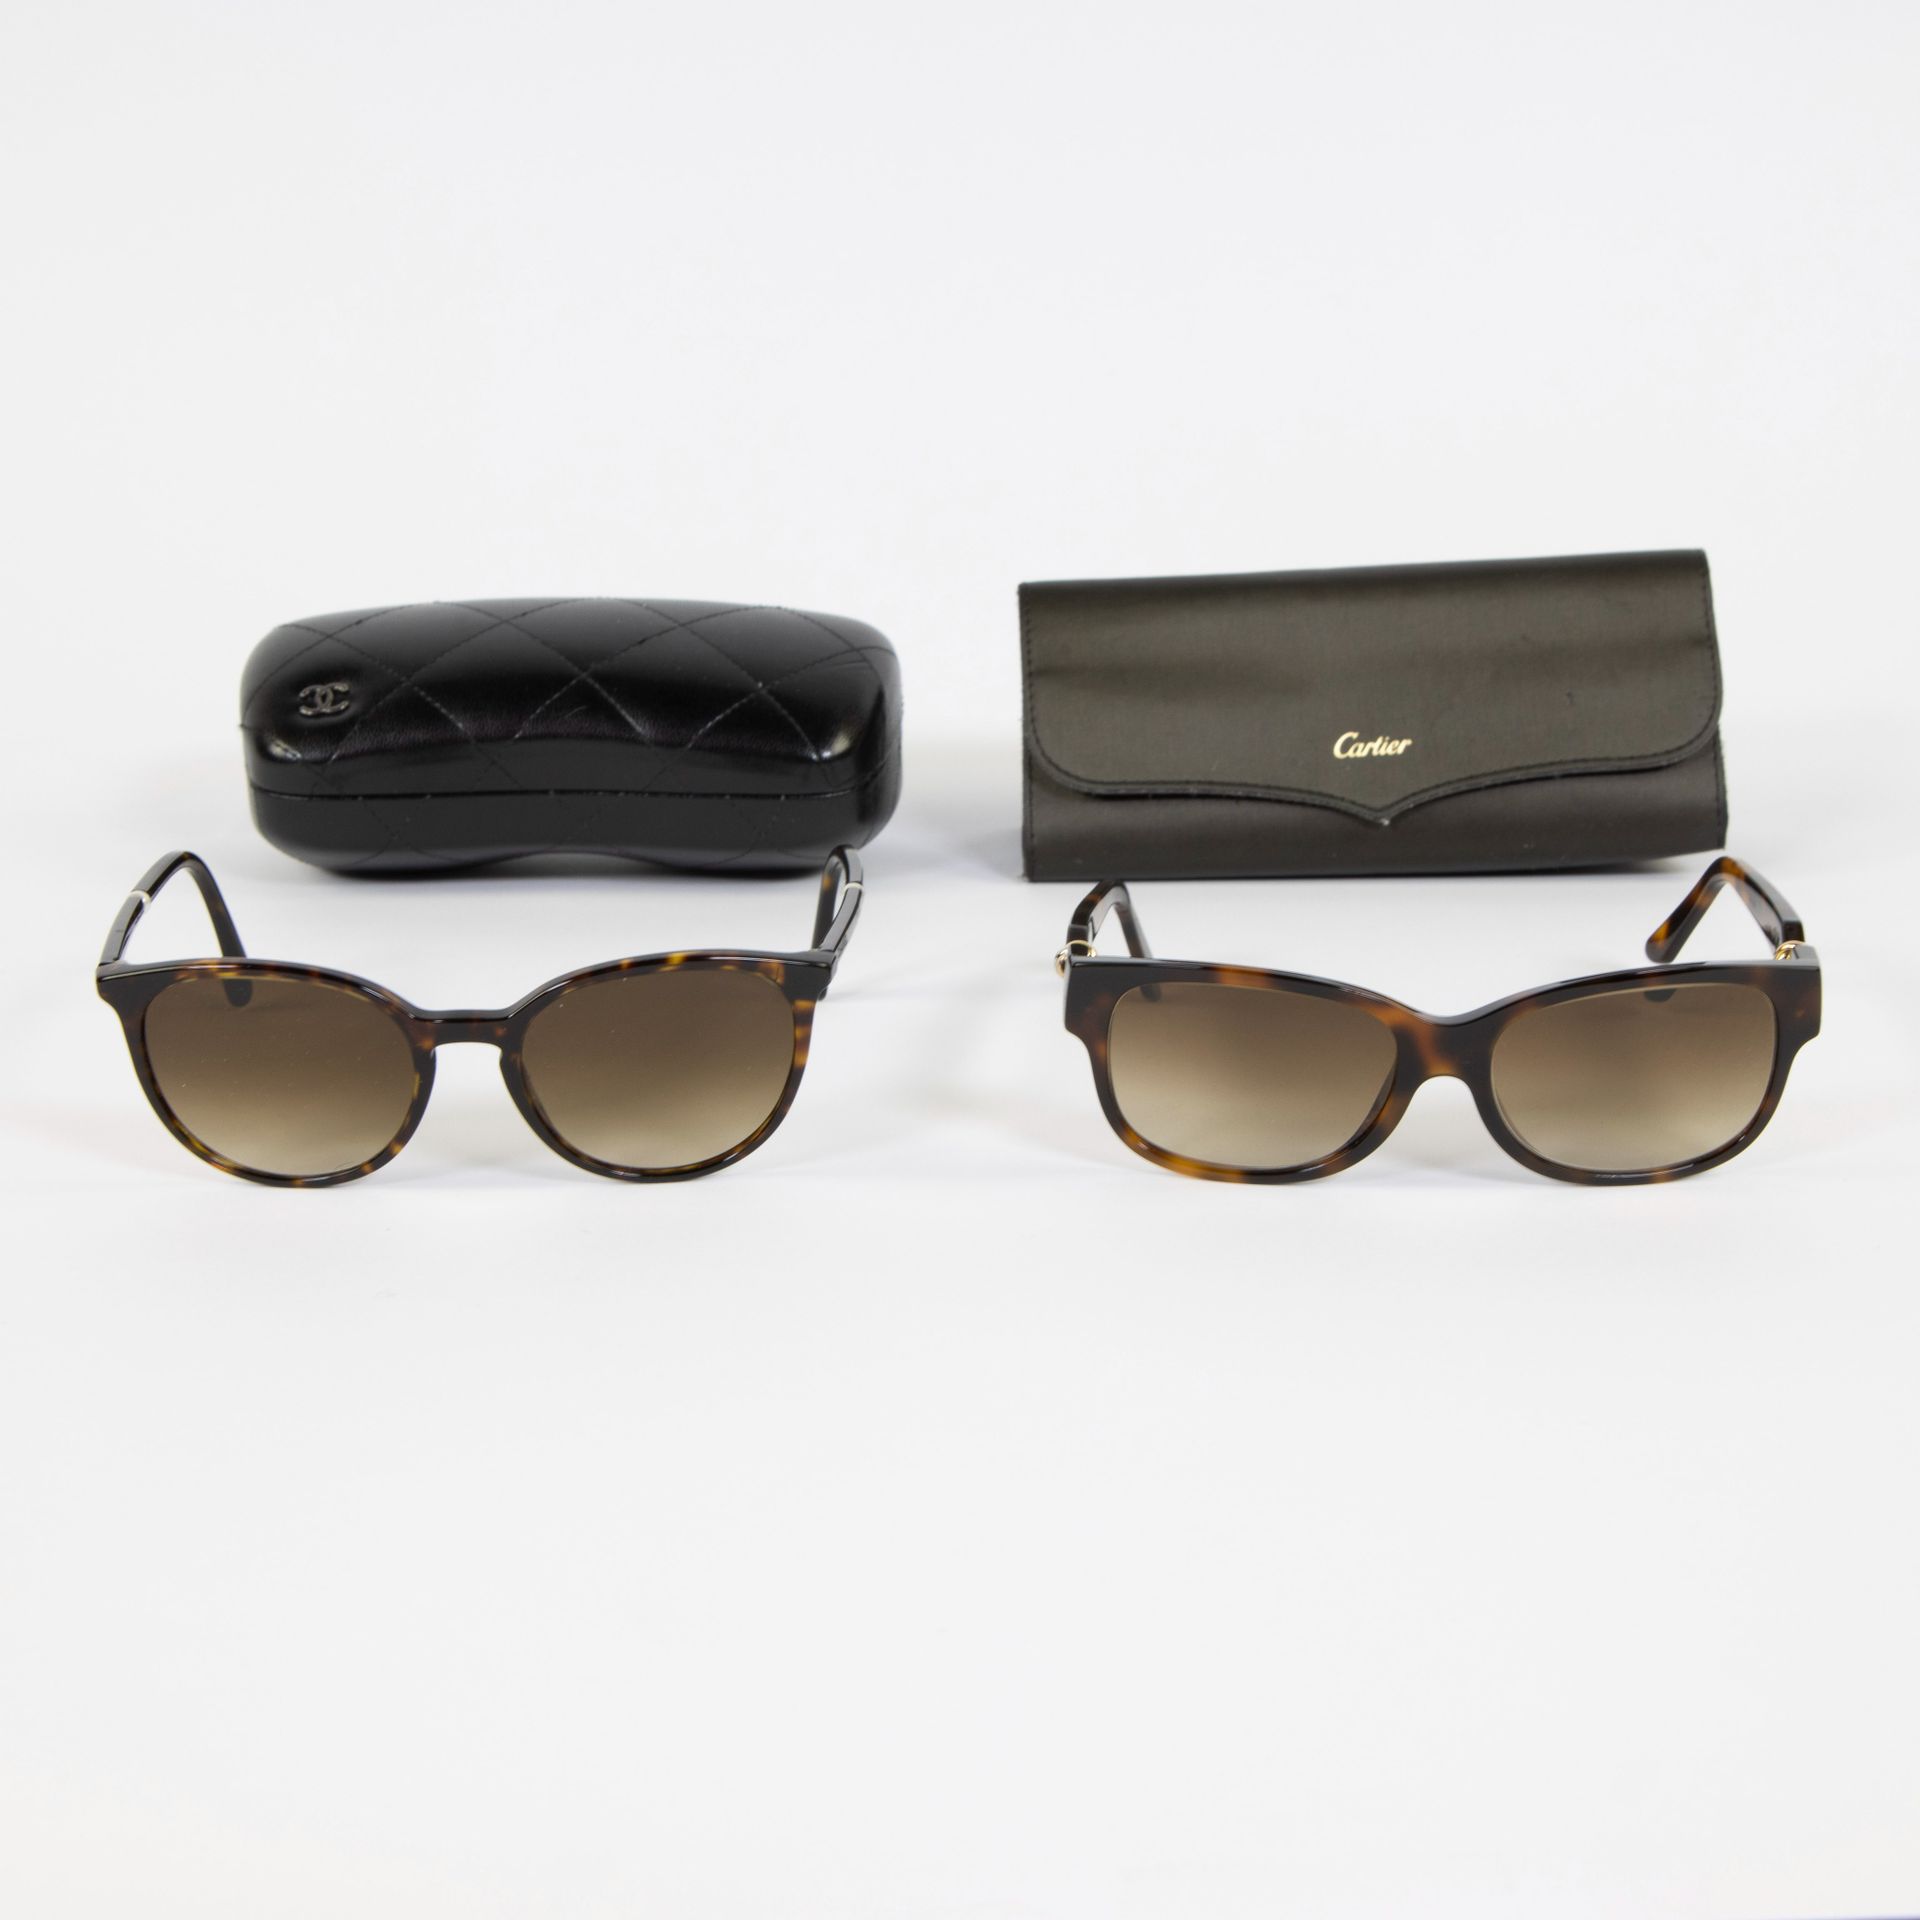 Lot of 2 Chanel and Cartier sunglasses with matching gla…